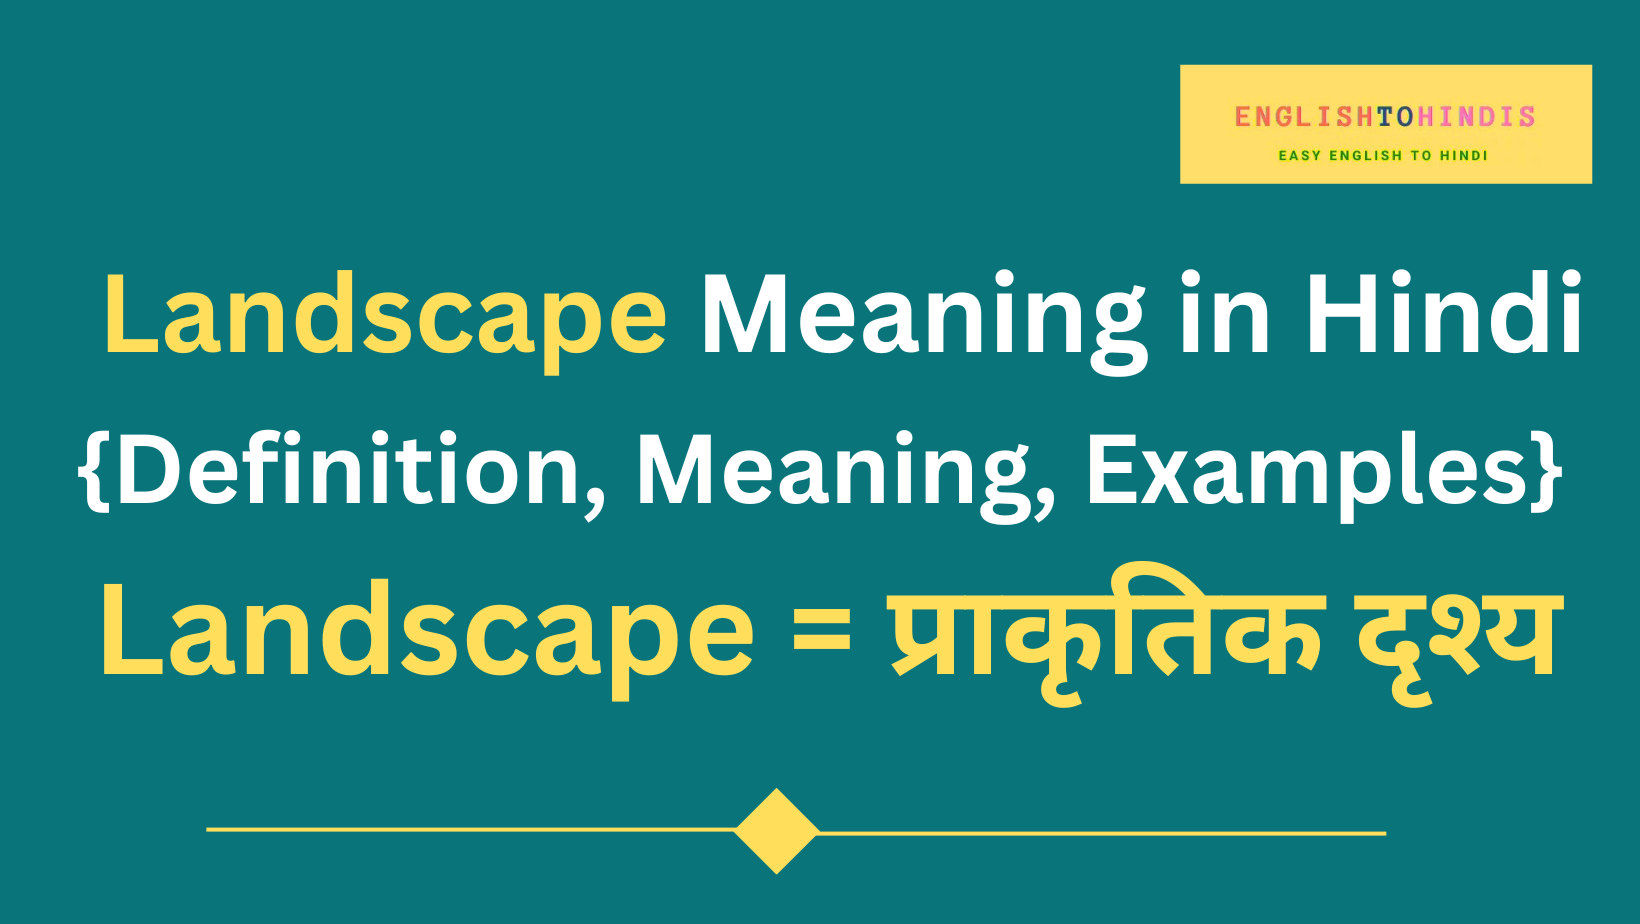 Landscape Meaning in Hindi